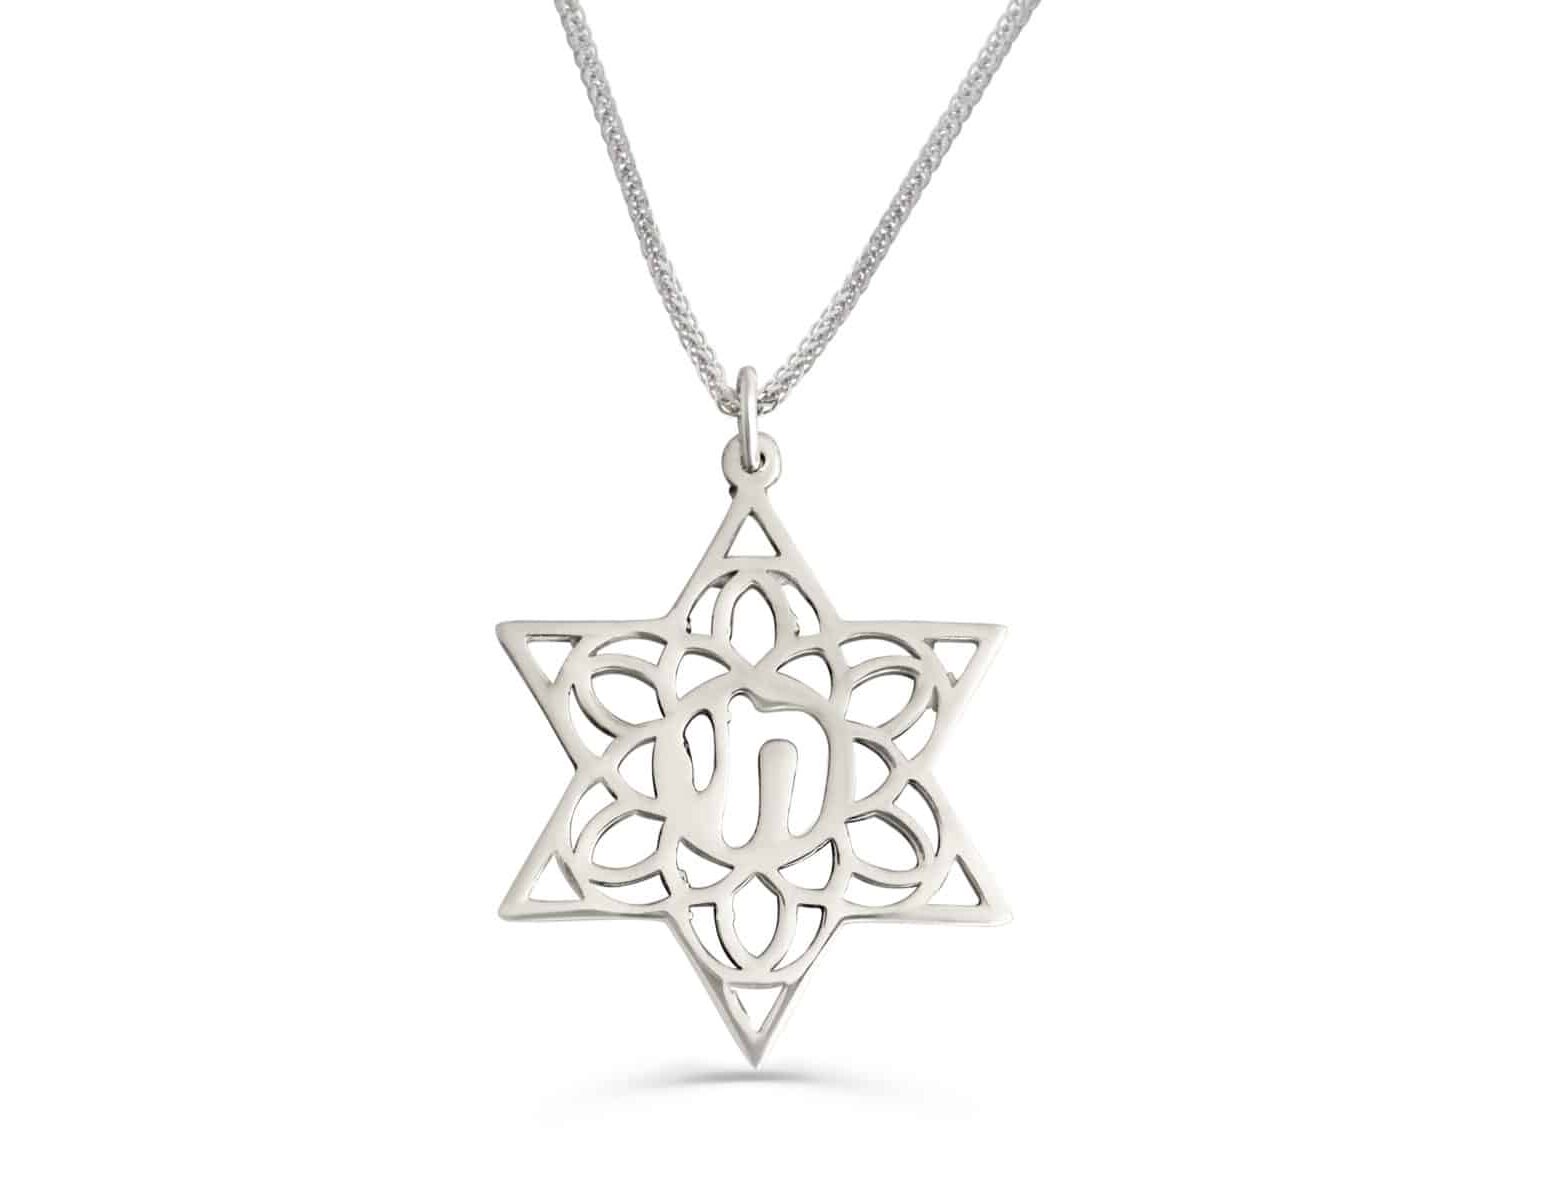 Sterling Silver Hollow Star of David Pendant